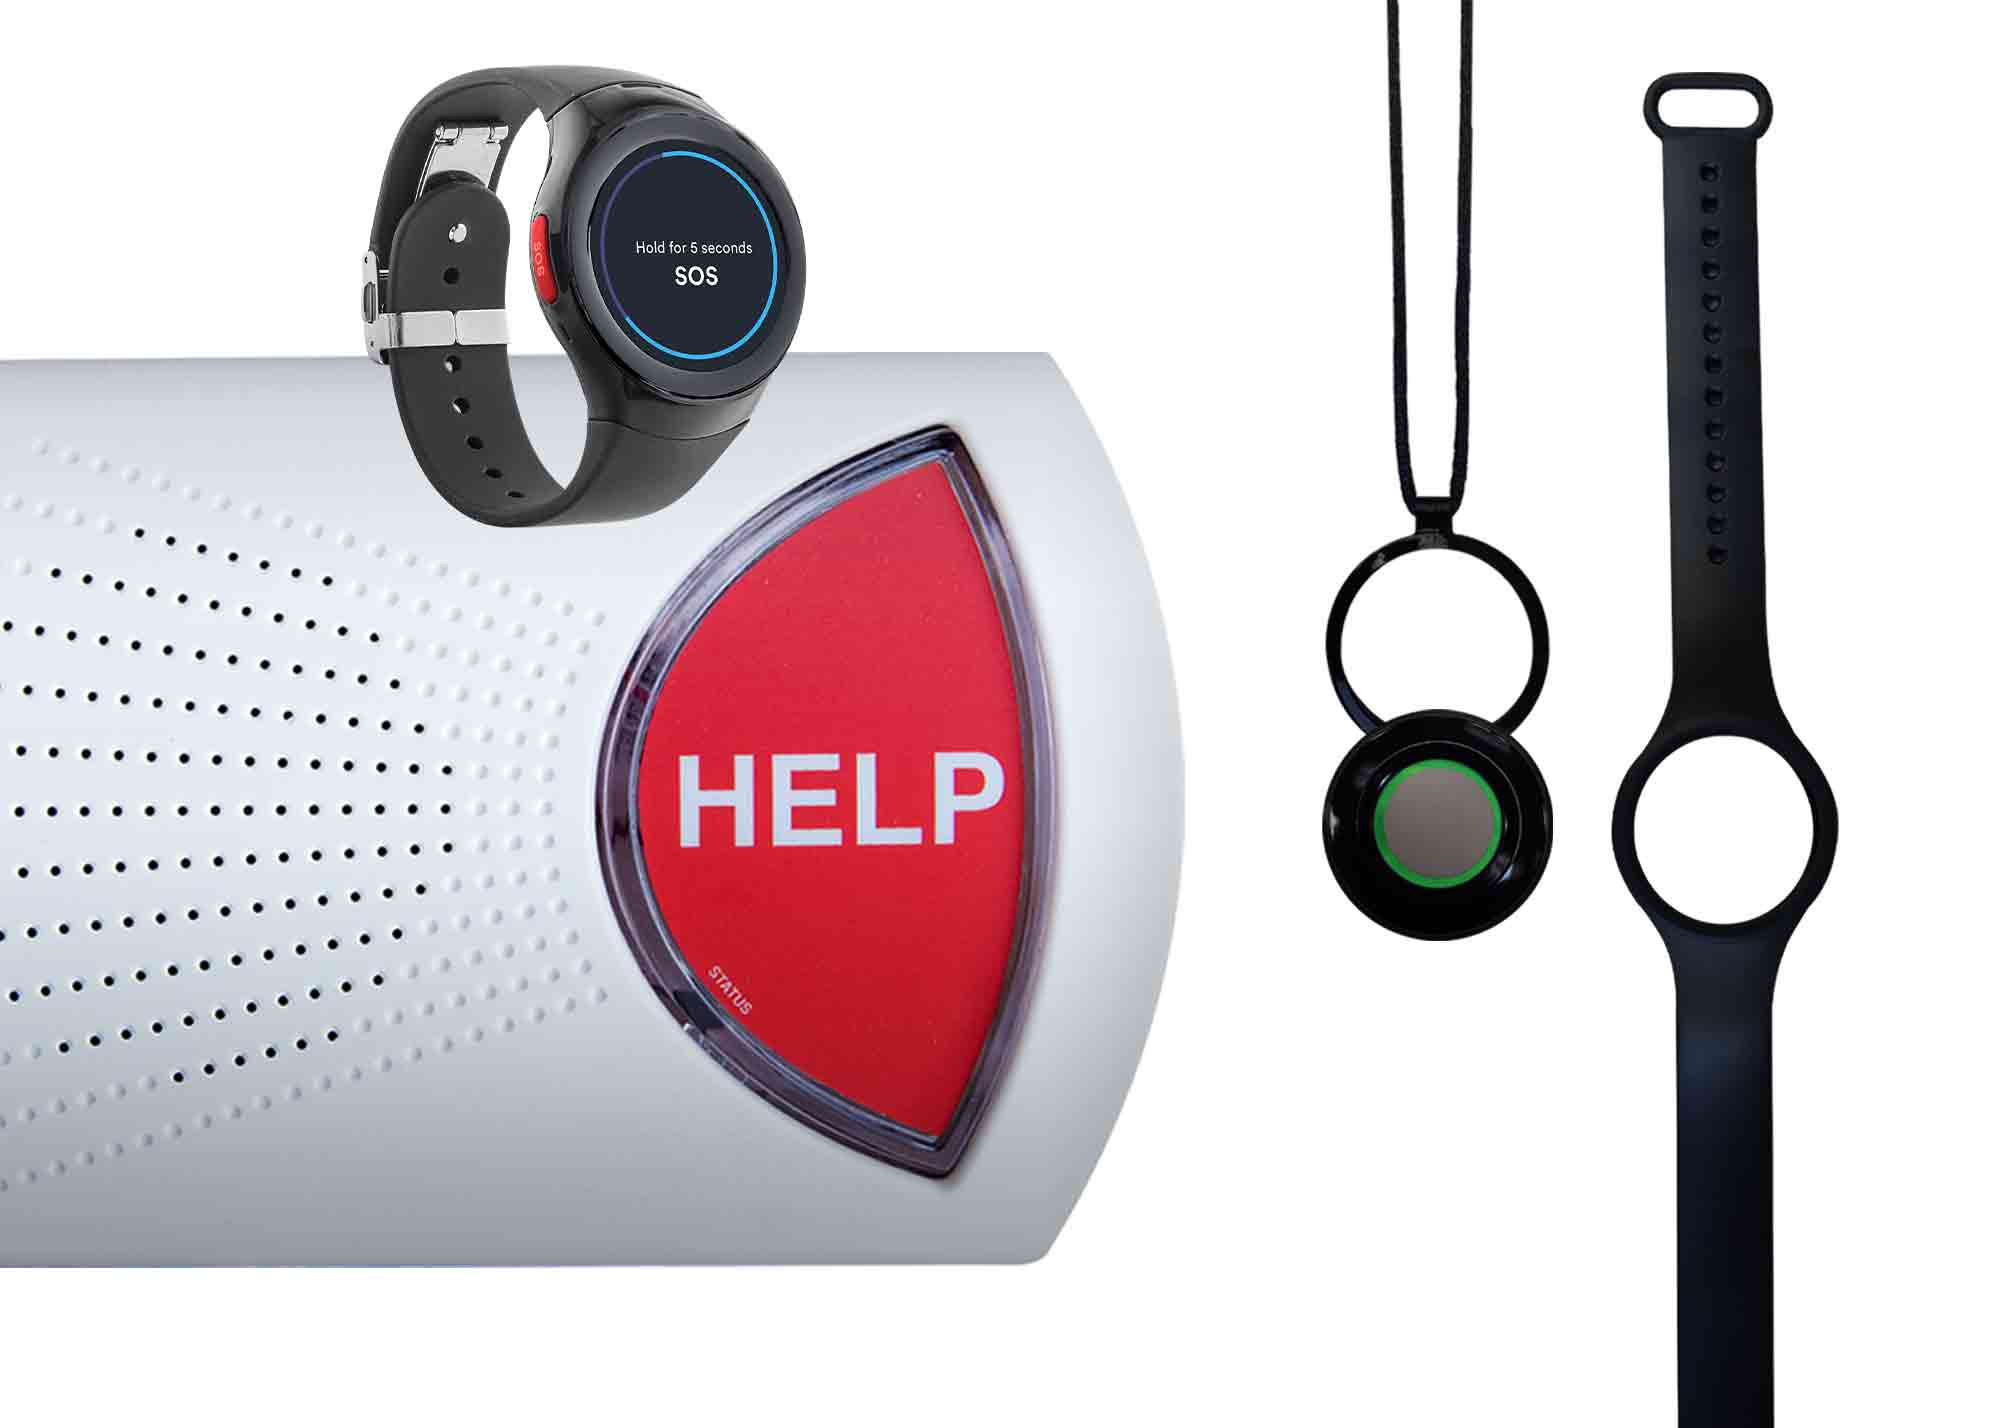 Black & Decker launches a line of emergency wearables for seniors